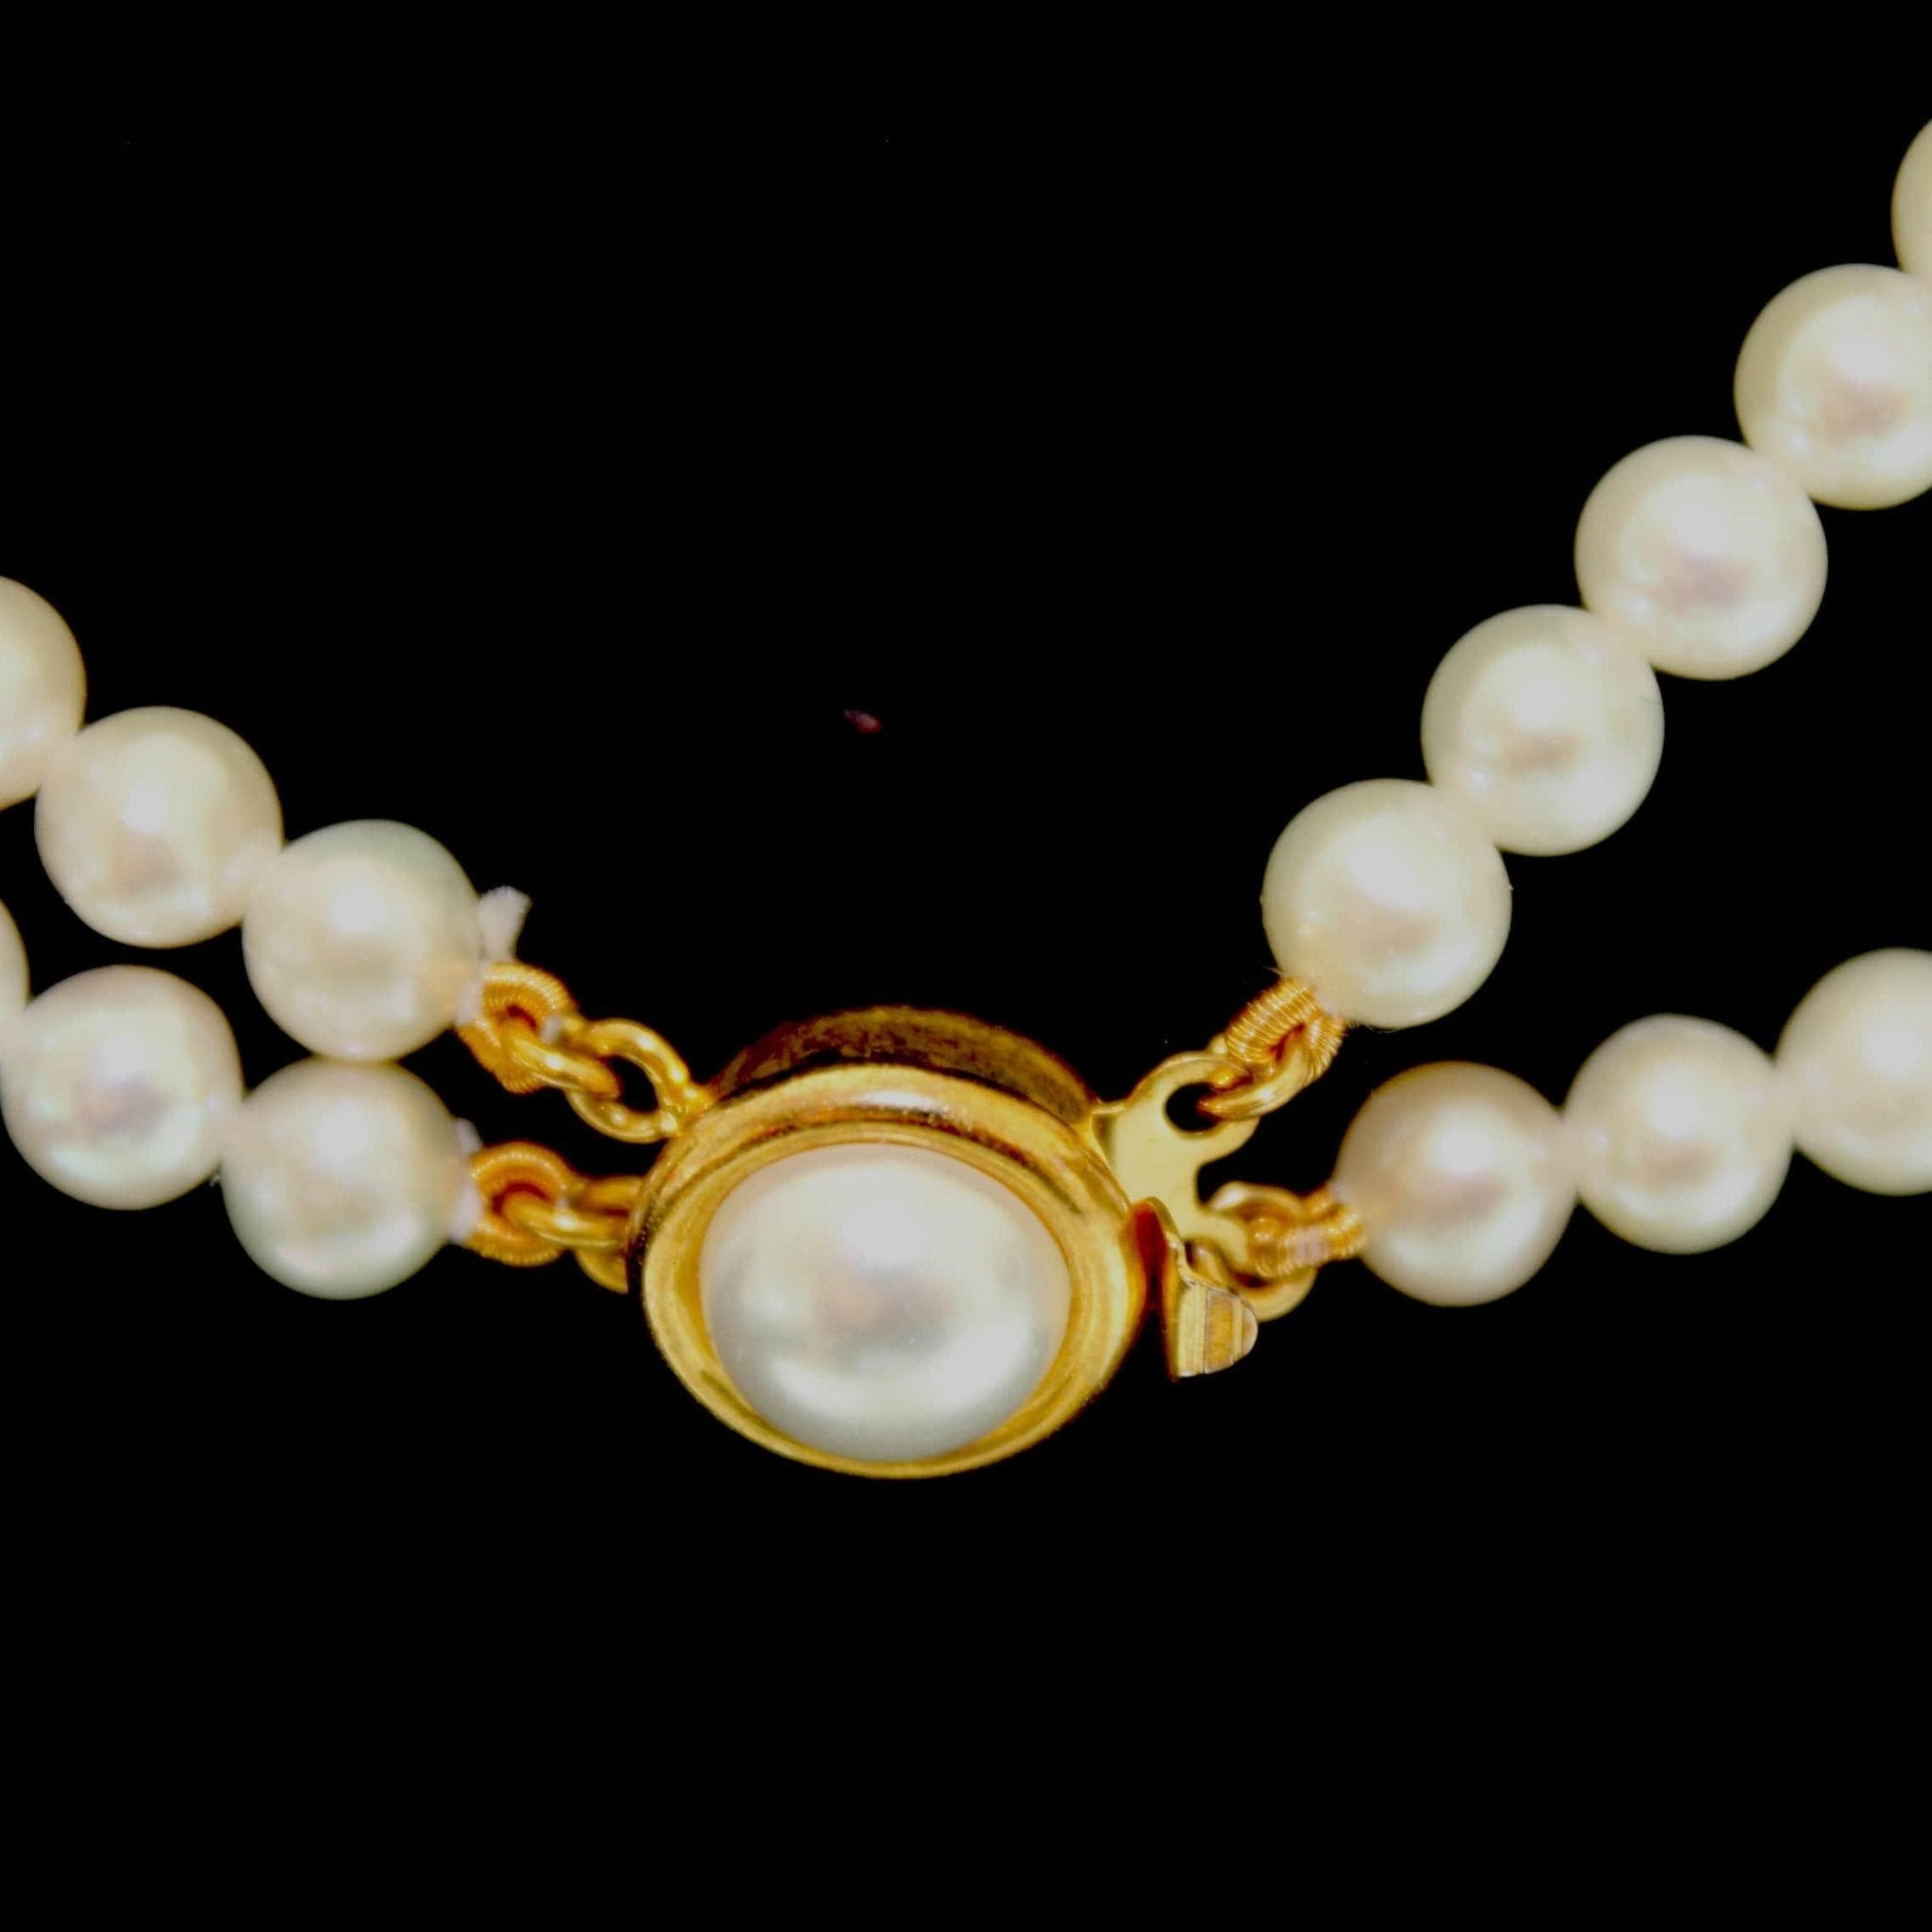 5mm Natural Fresh Water Real Pearl Necklace (Double Strand) UK - Ammpoure Wellbeing